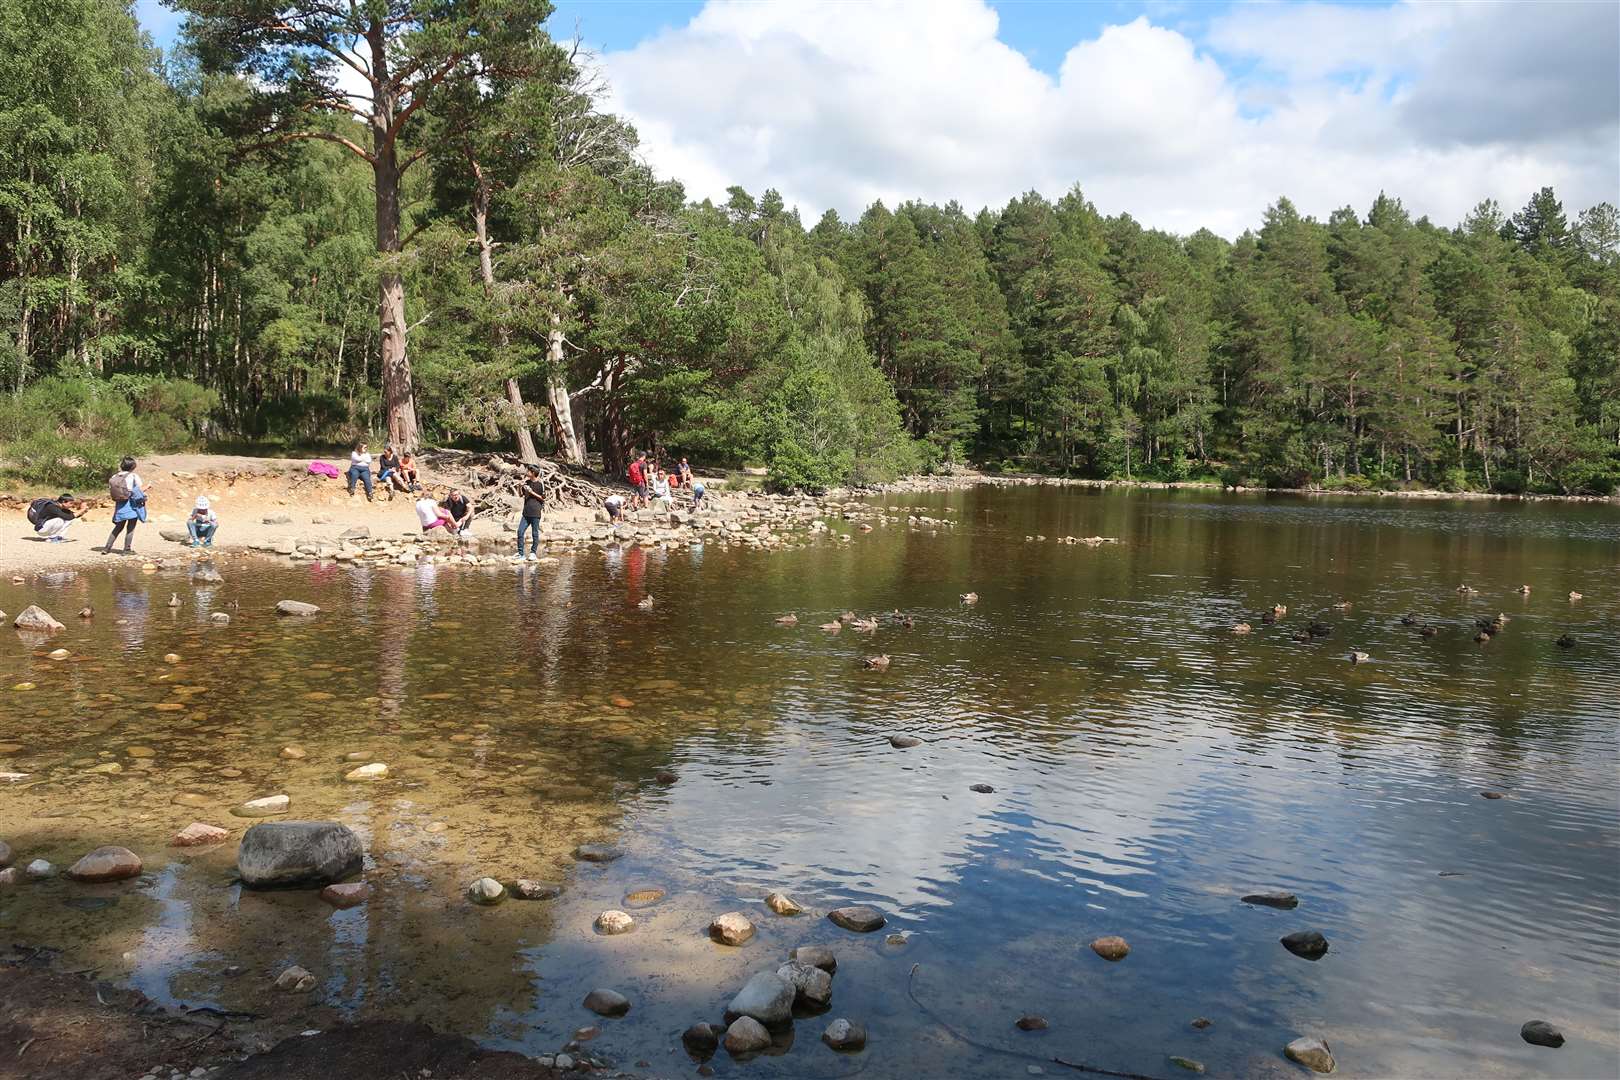 Loch an Eilein is a popular spot with visitors.